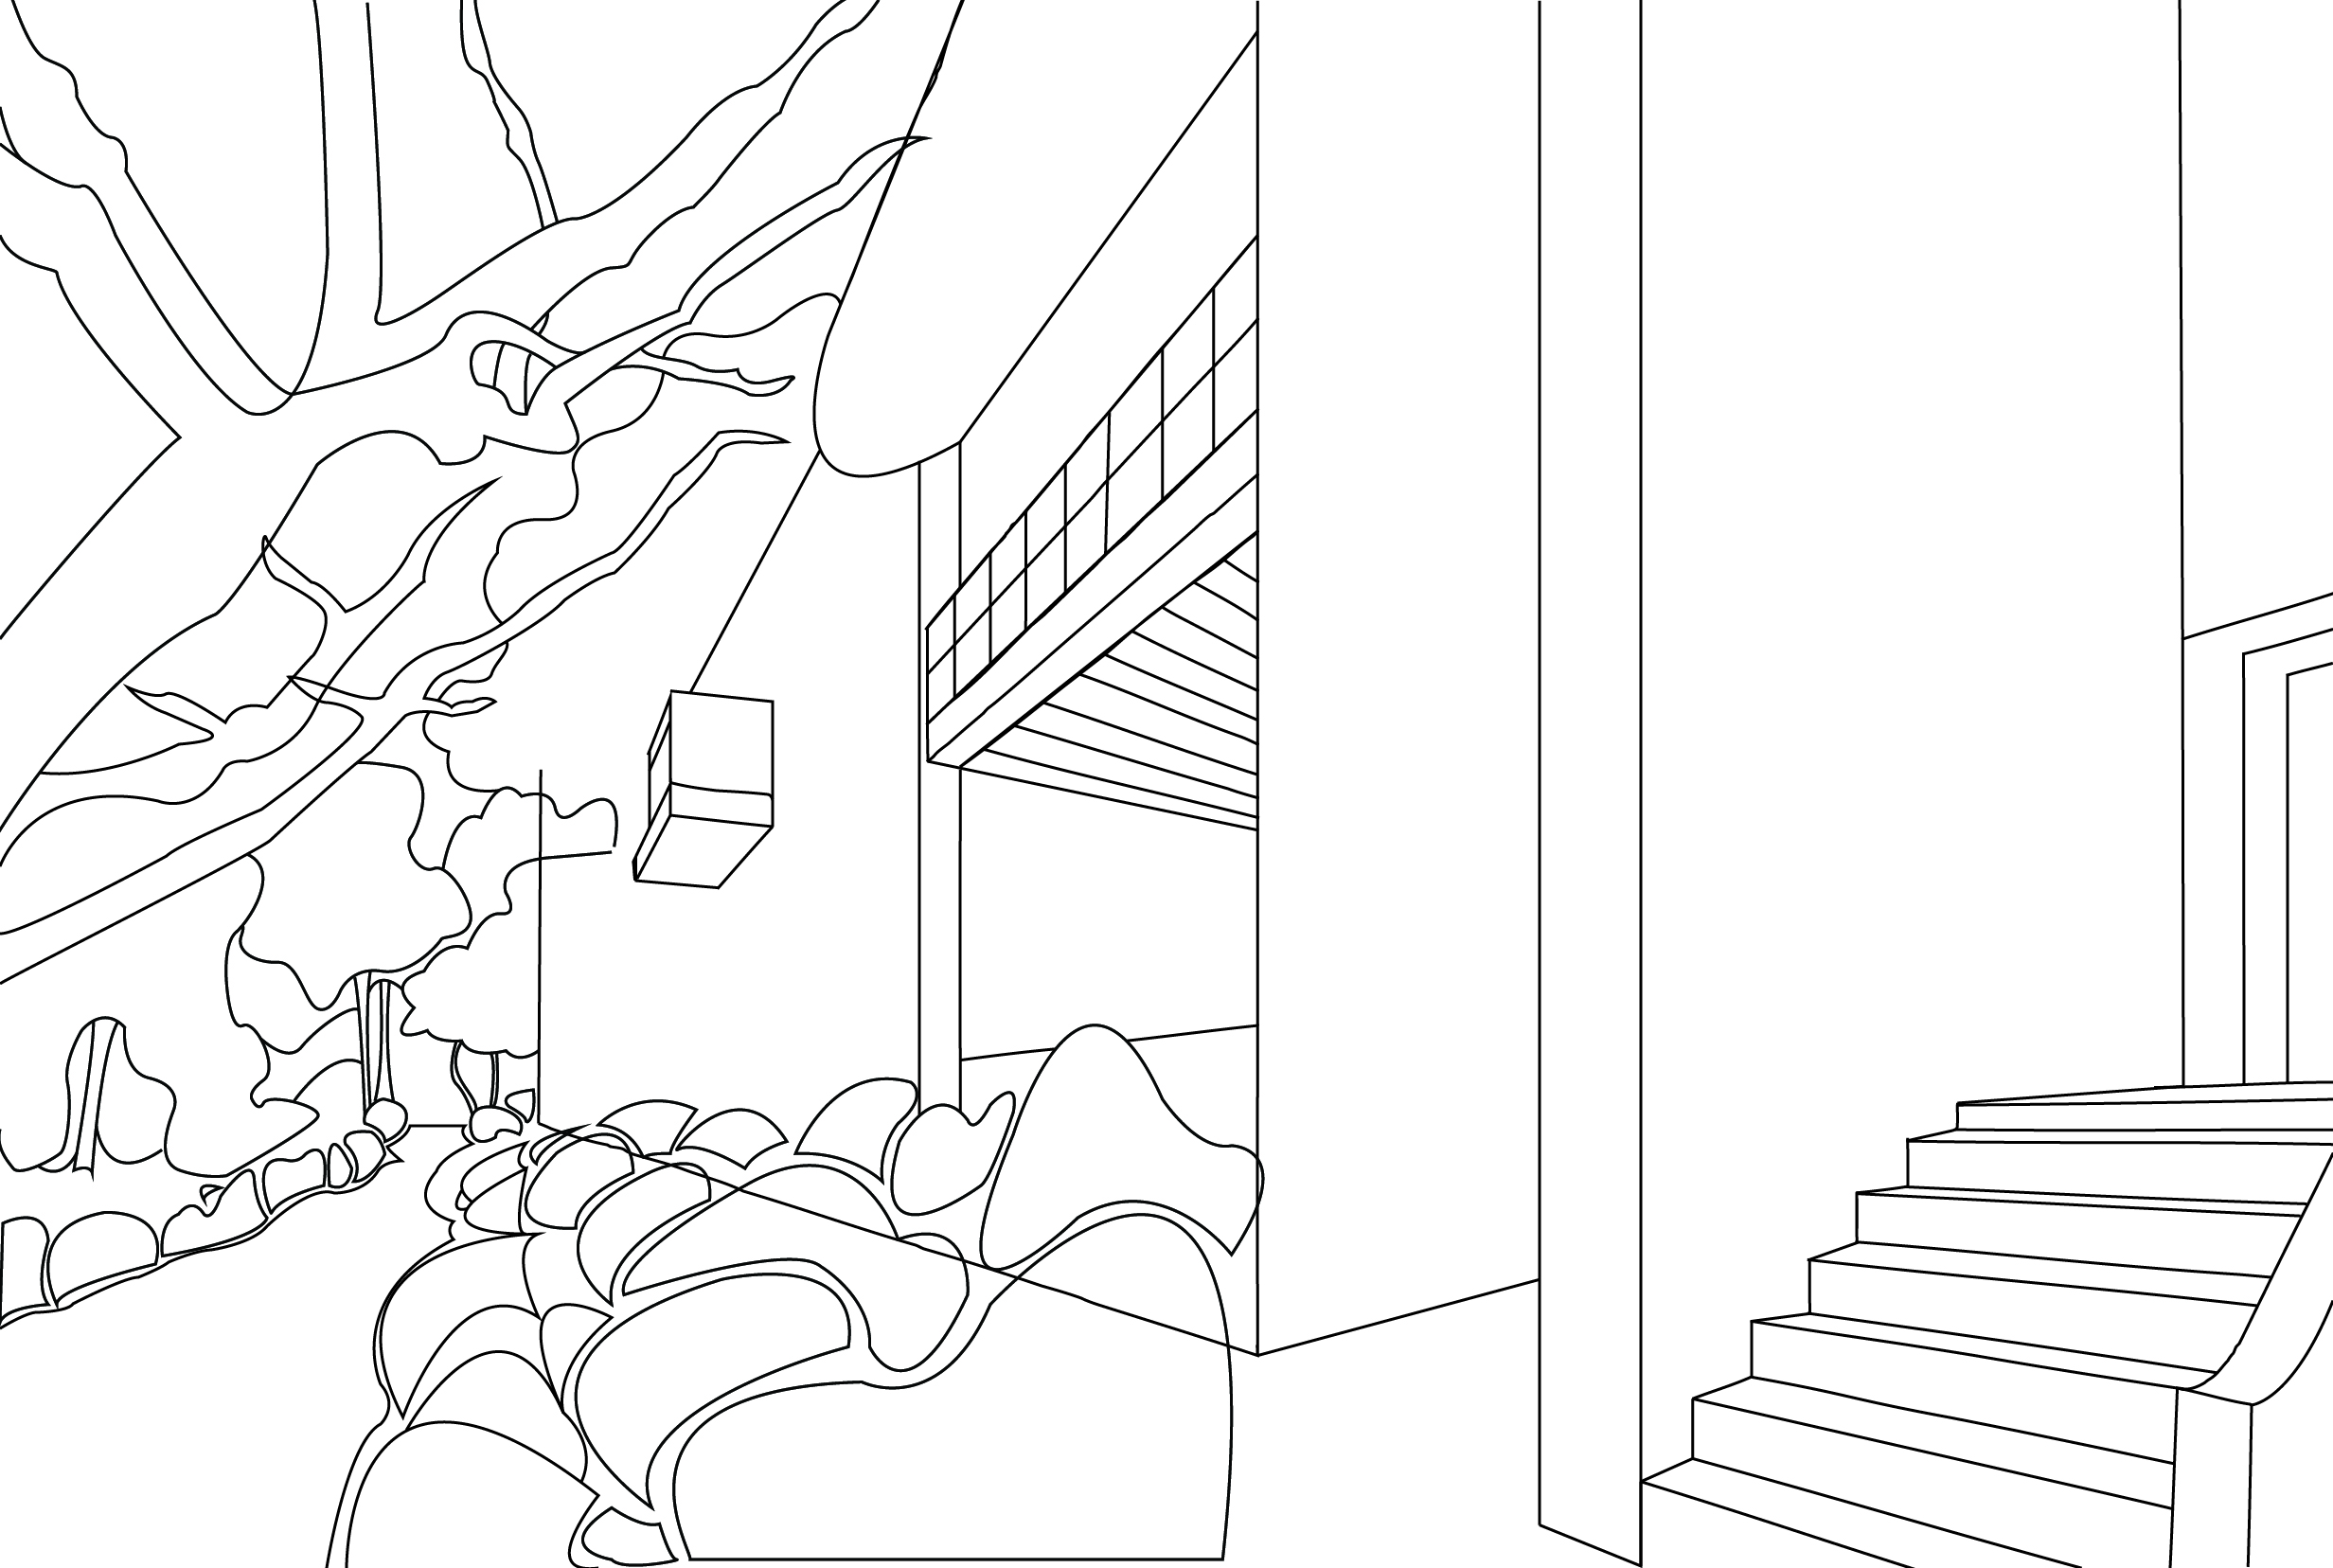 This is a screenshot of the beginning stages of my illustration. 